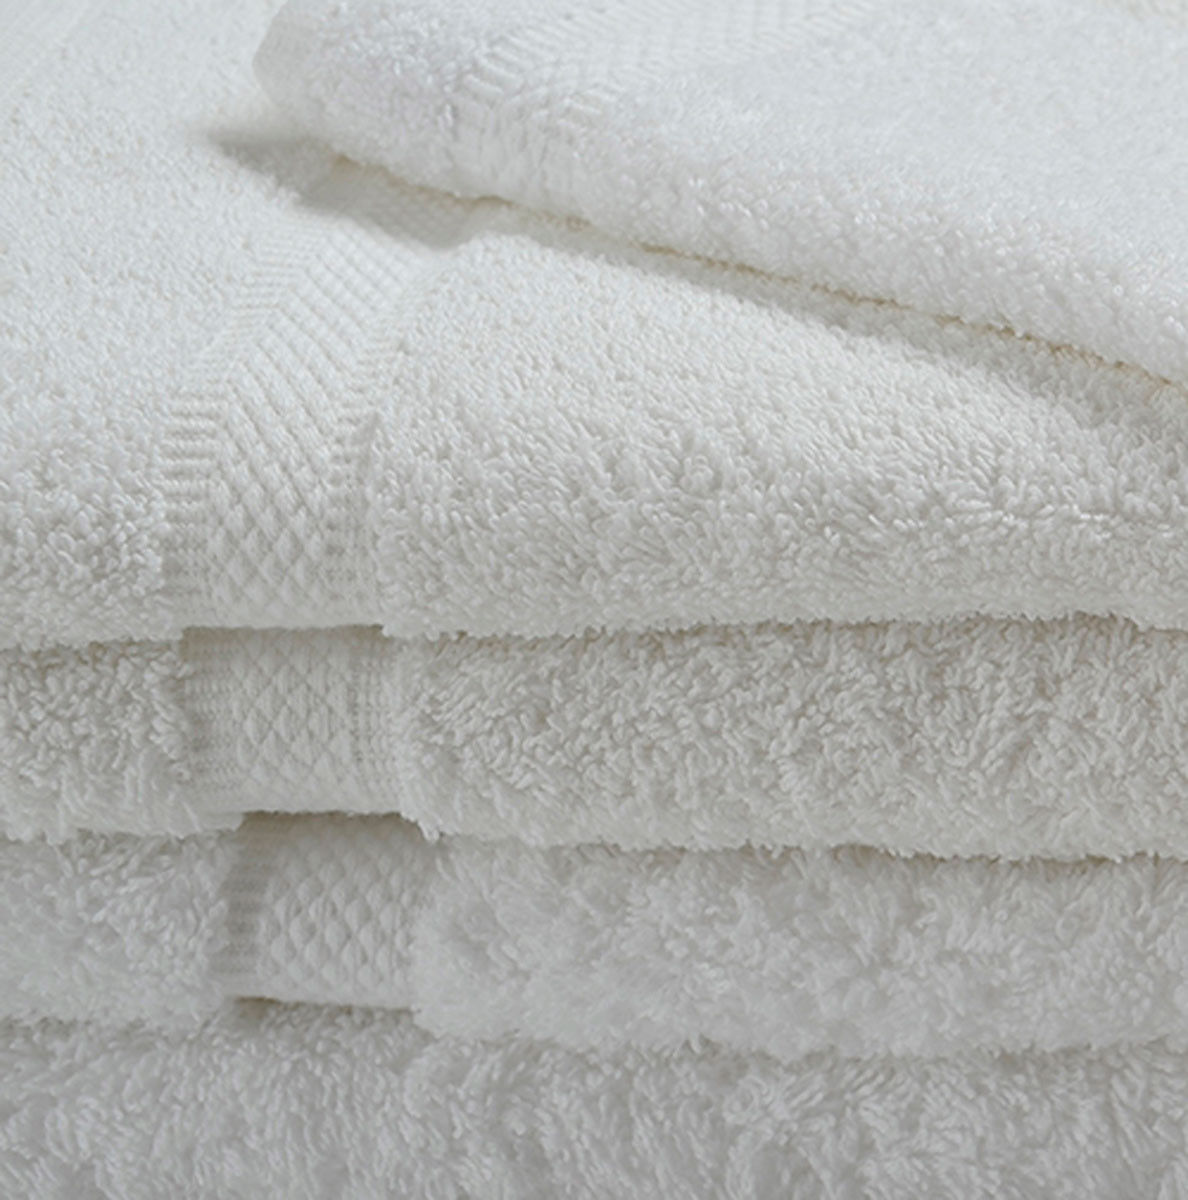 Can you list the features of the Oxford Imperiale Towels in white?